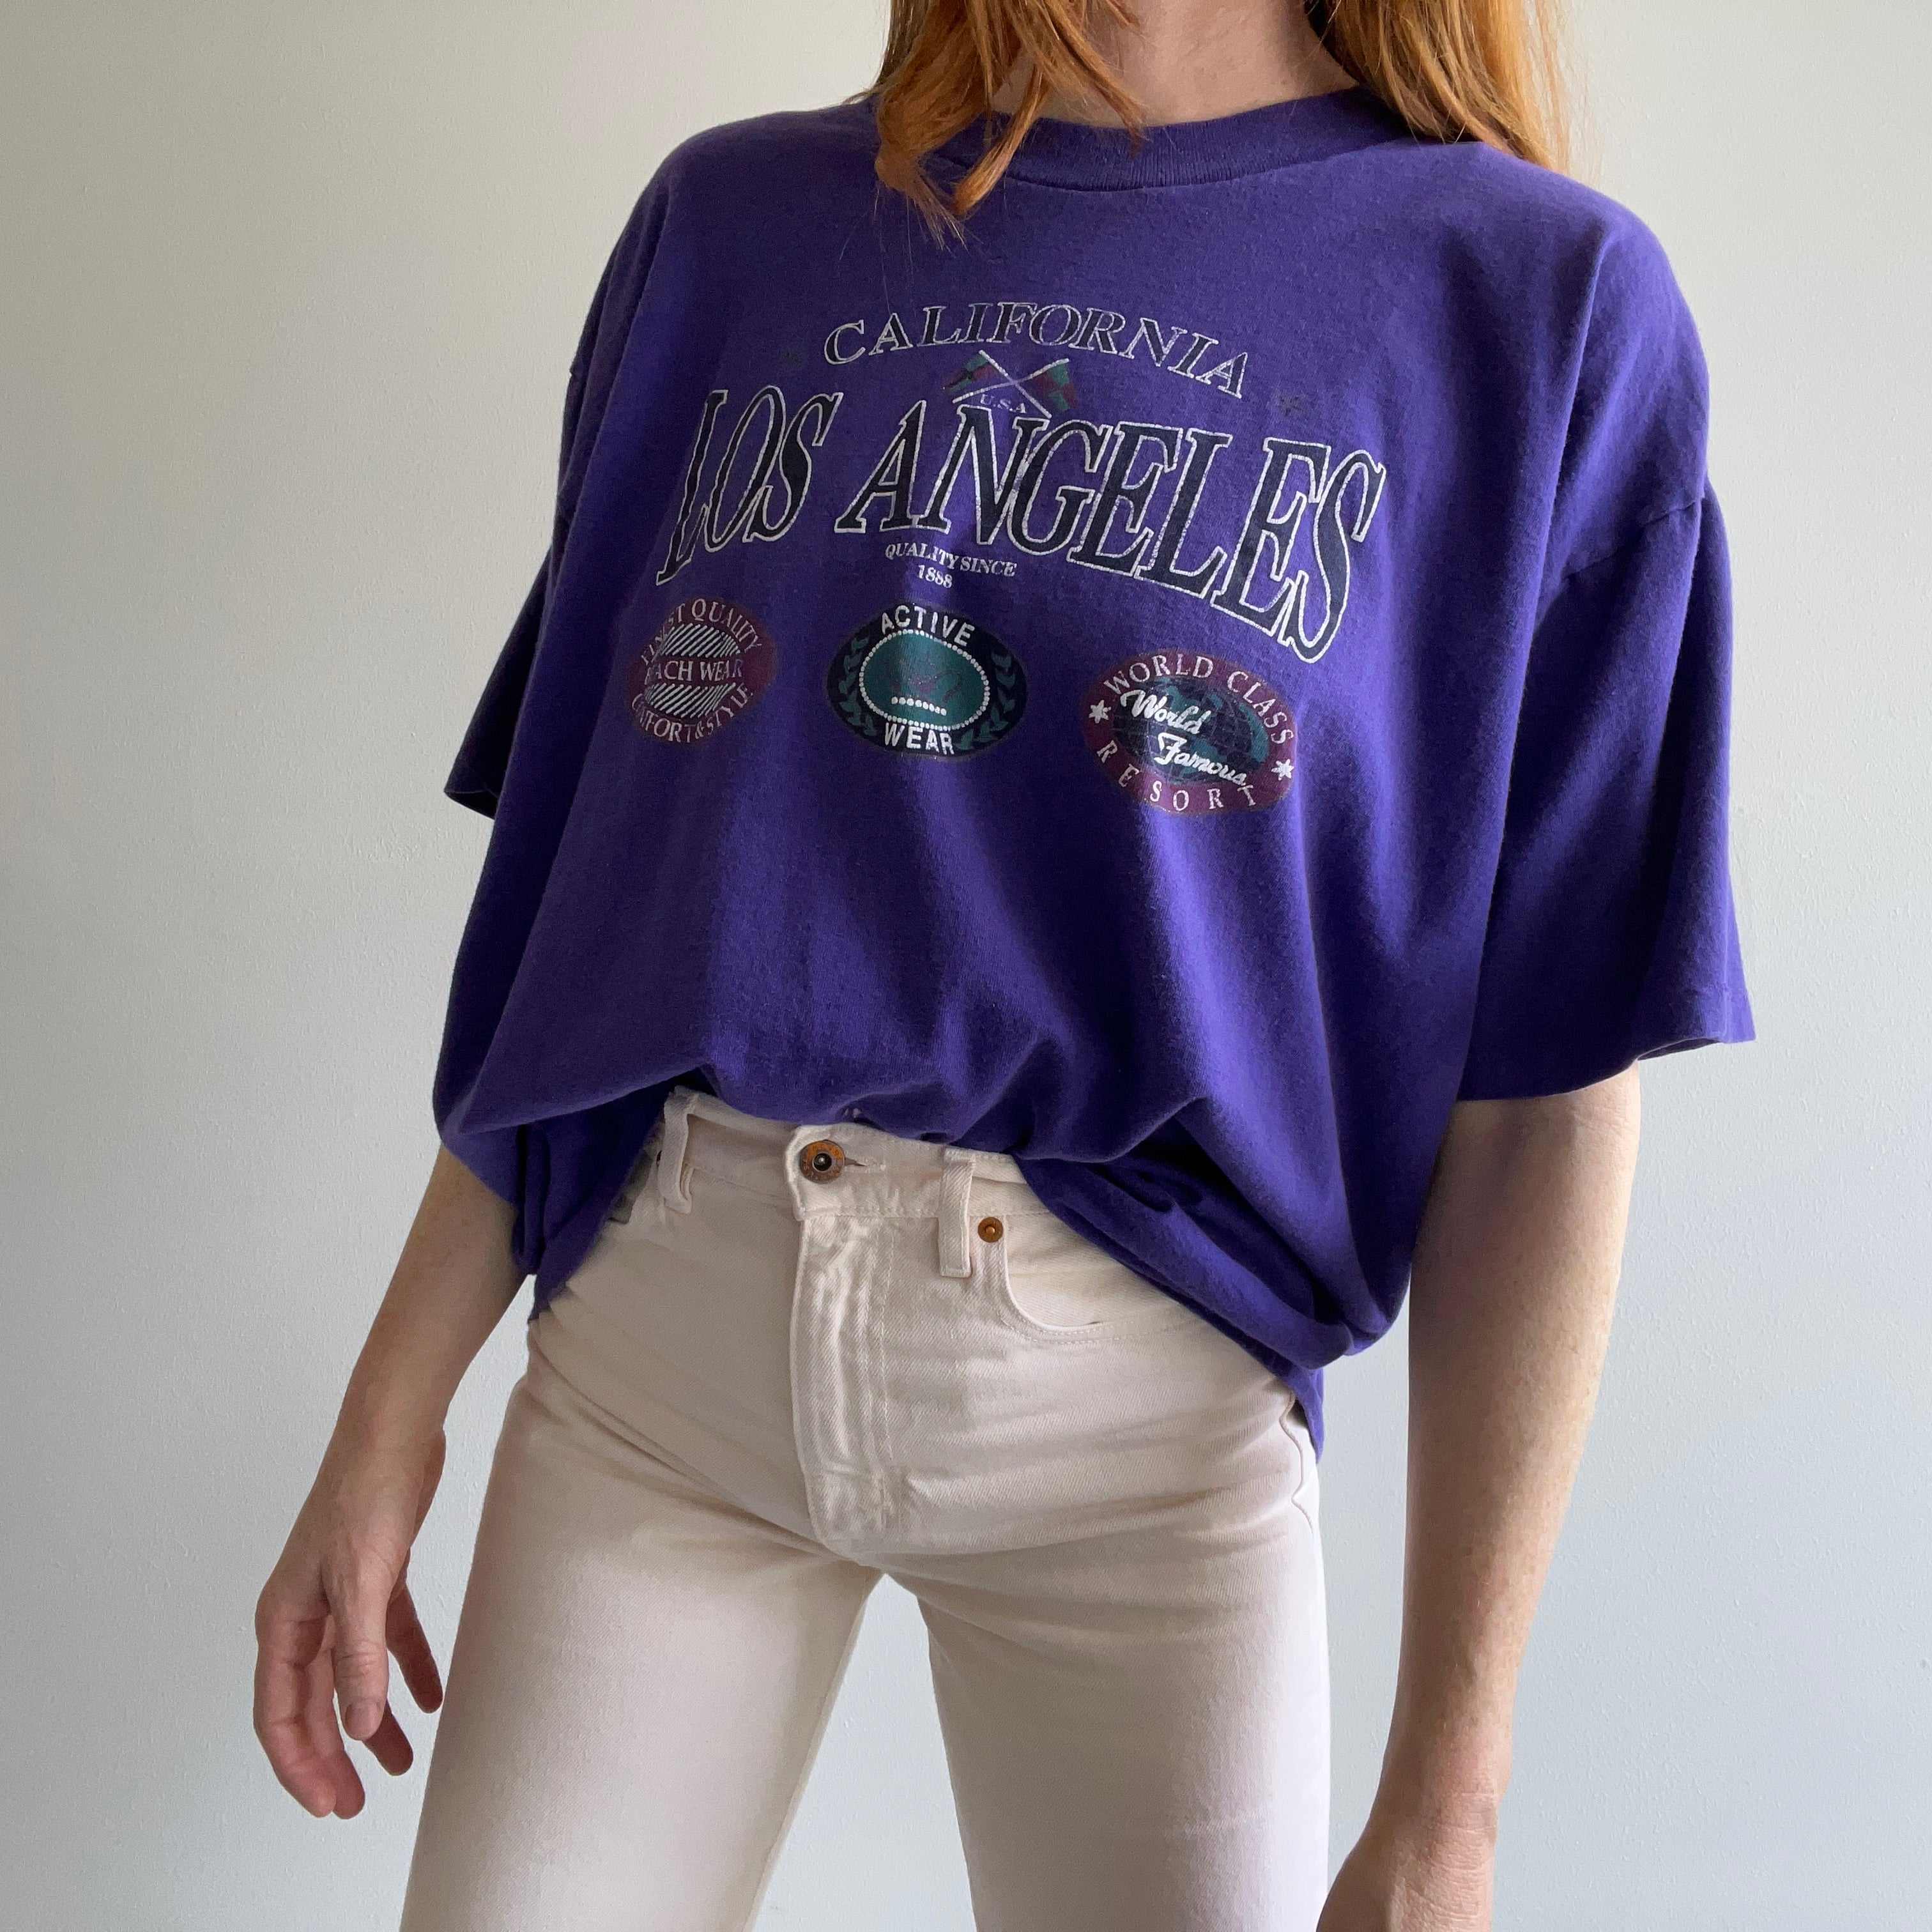 1990s Los Angeles Bleach Stained Cotton Tourist T-Shirt